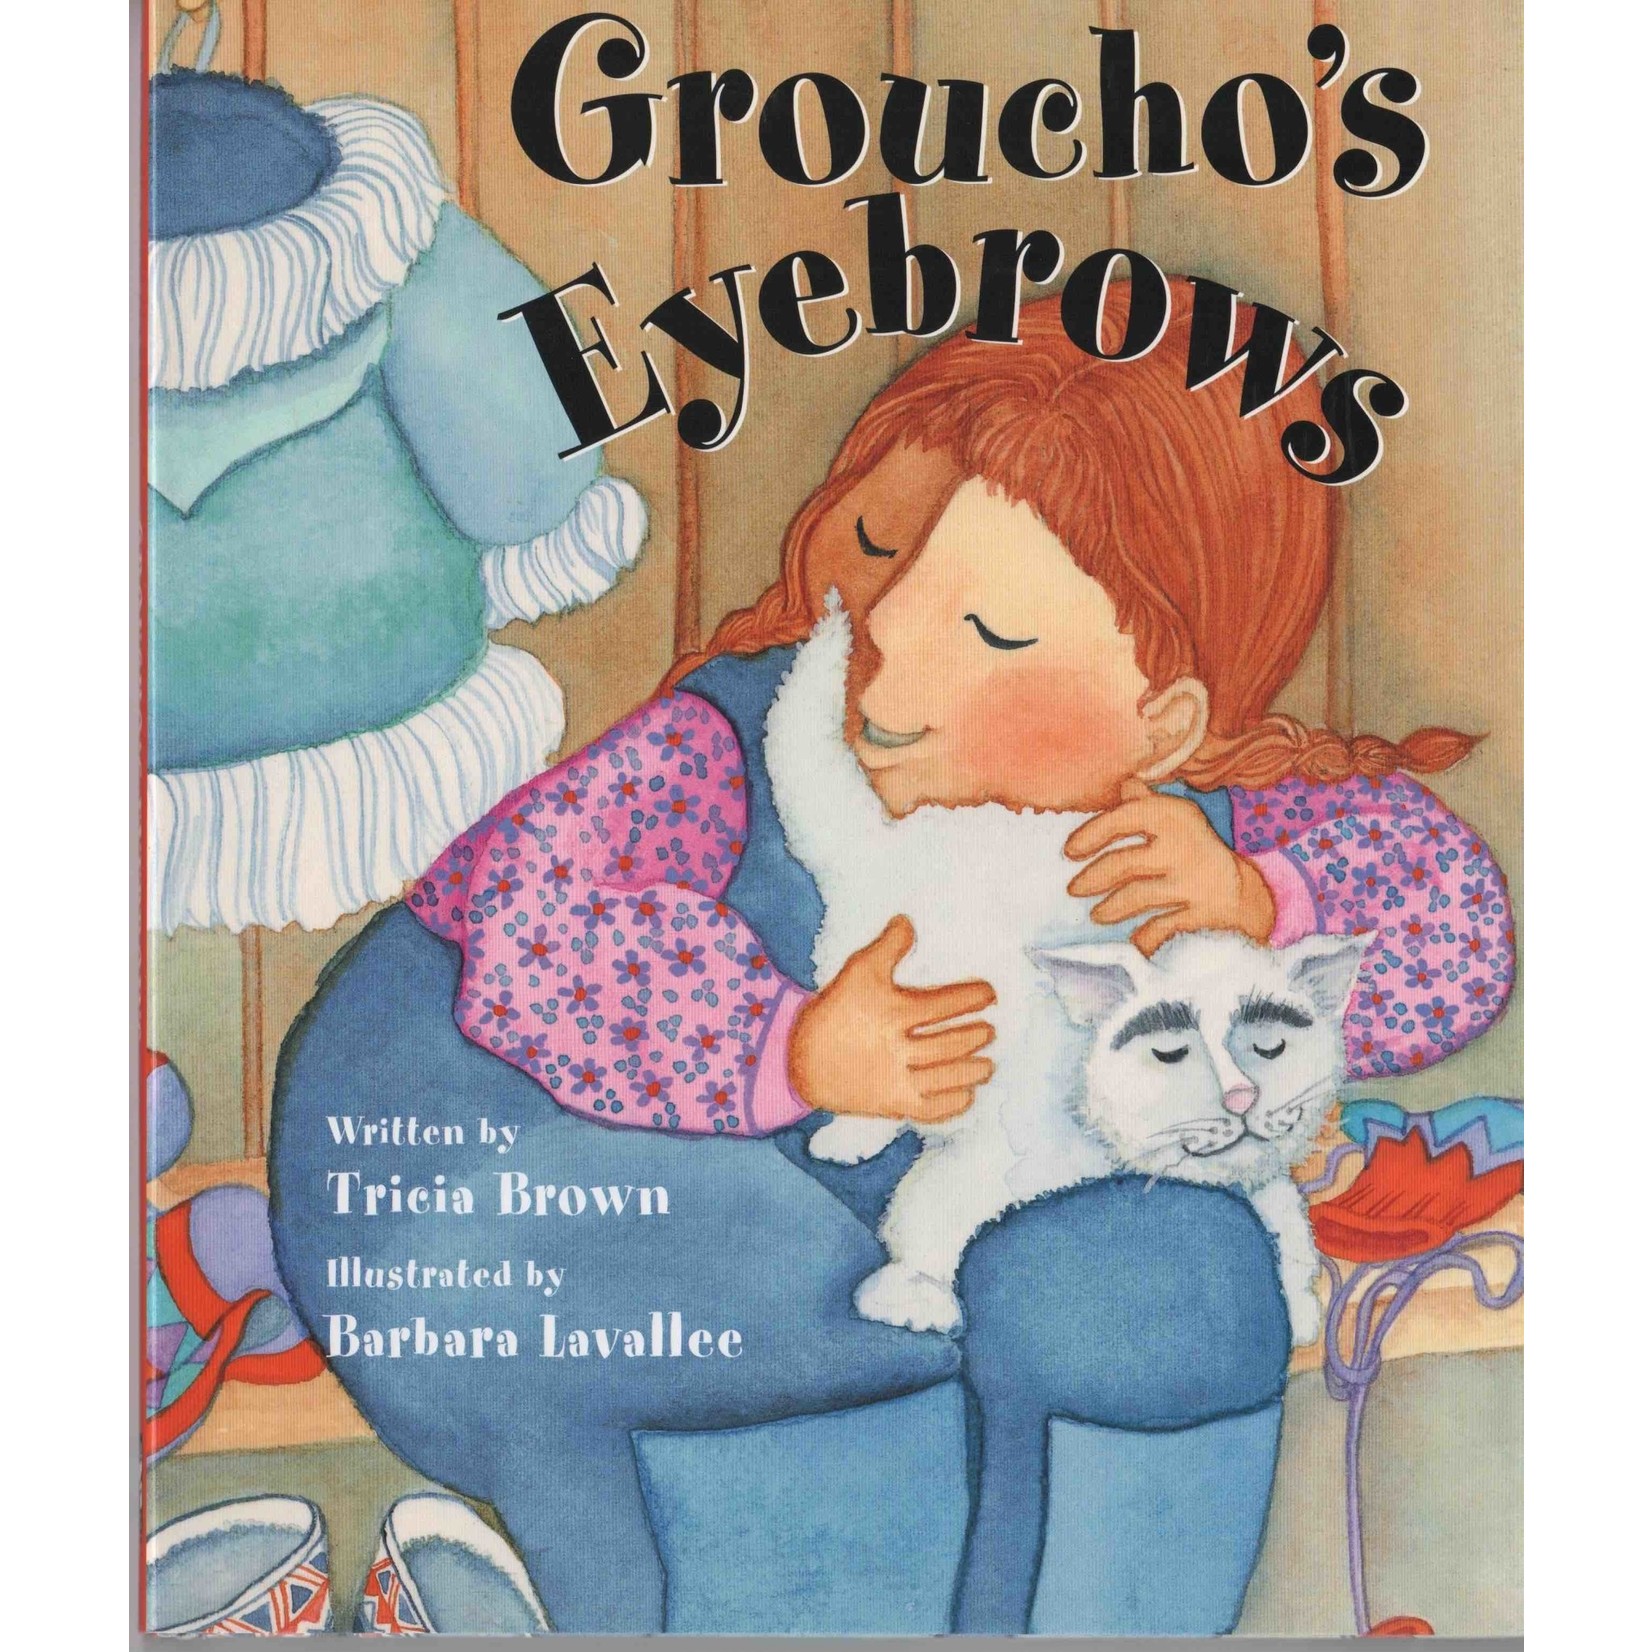 Barbara Lavallee Groucho's Eyebrows (book) | Barbara Lavallee